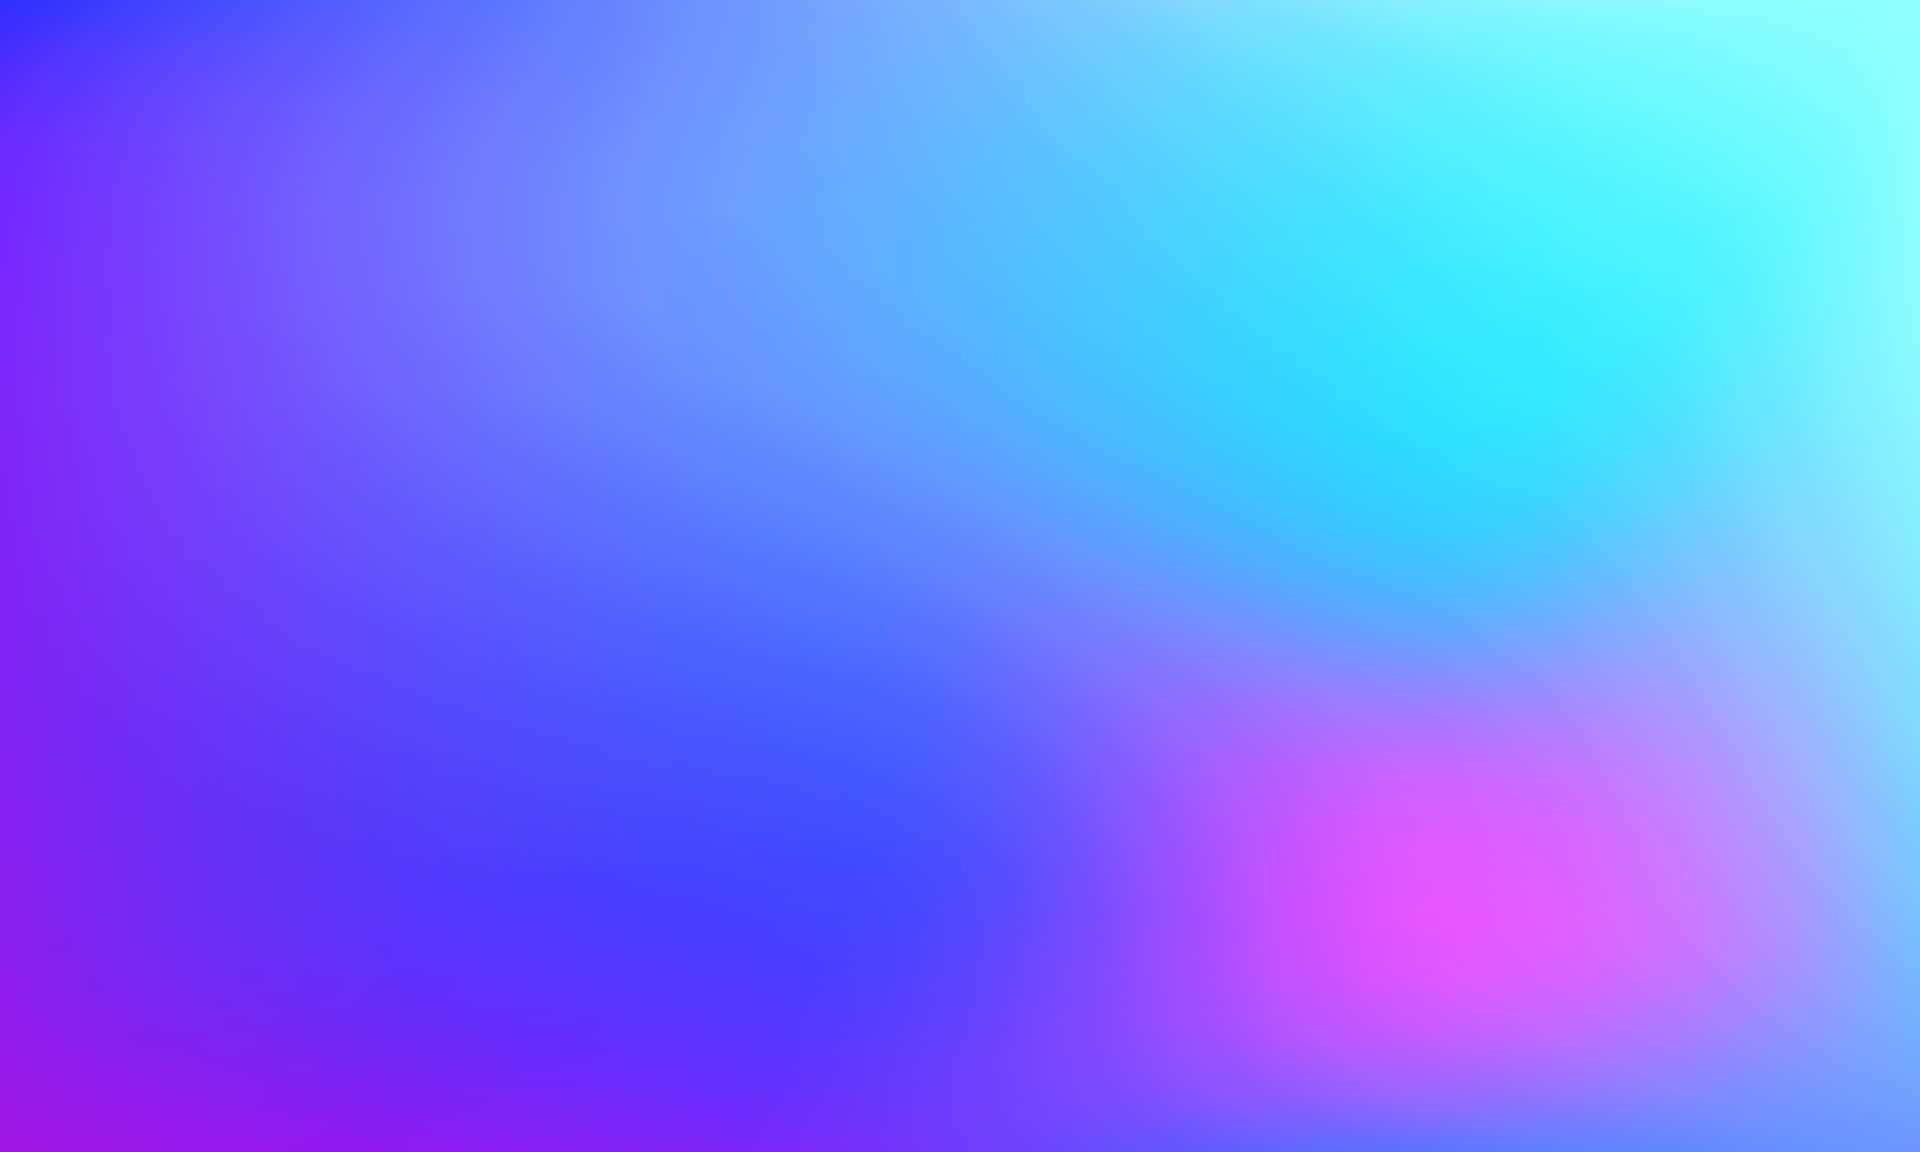 A Blue And Purple Blurred Background